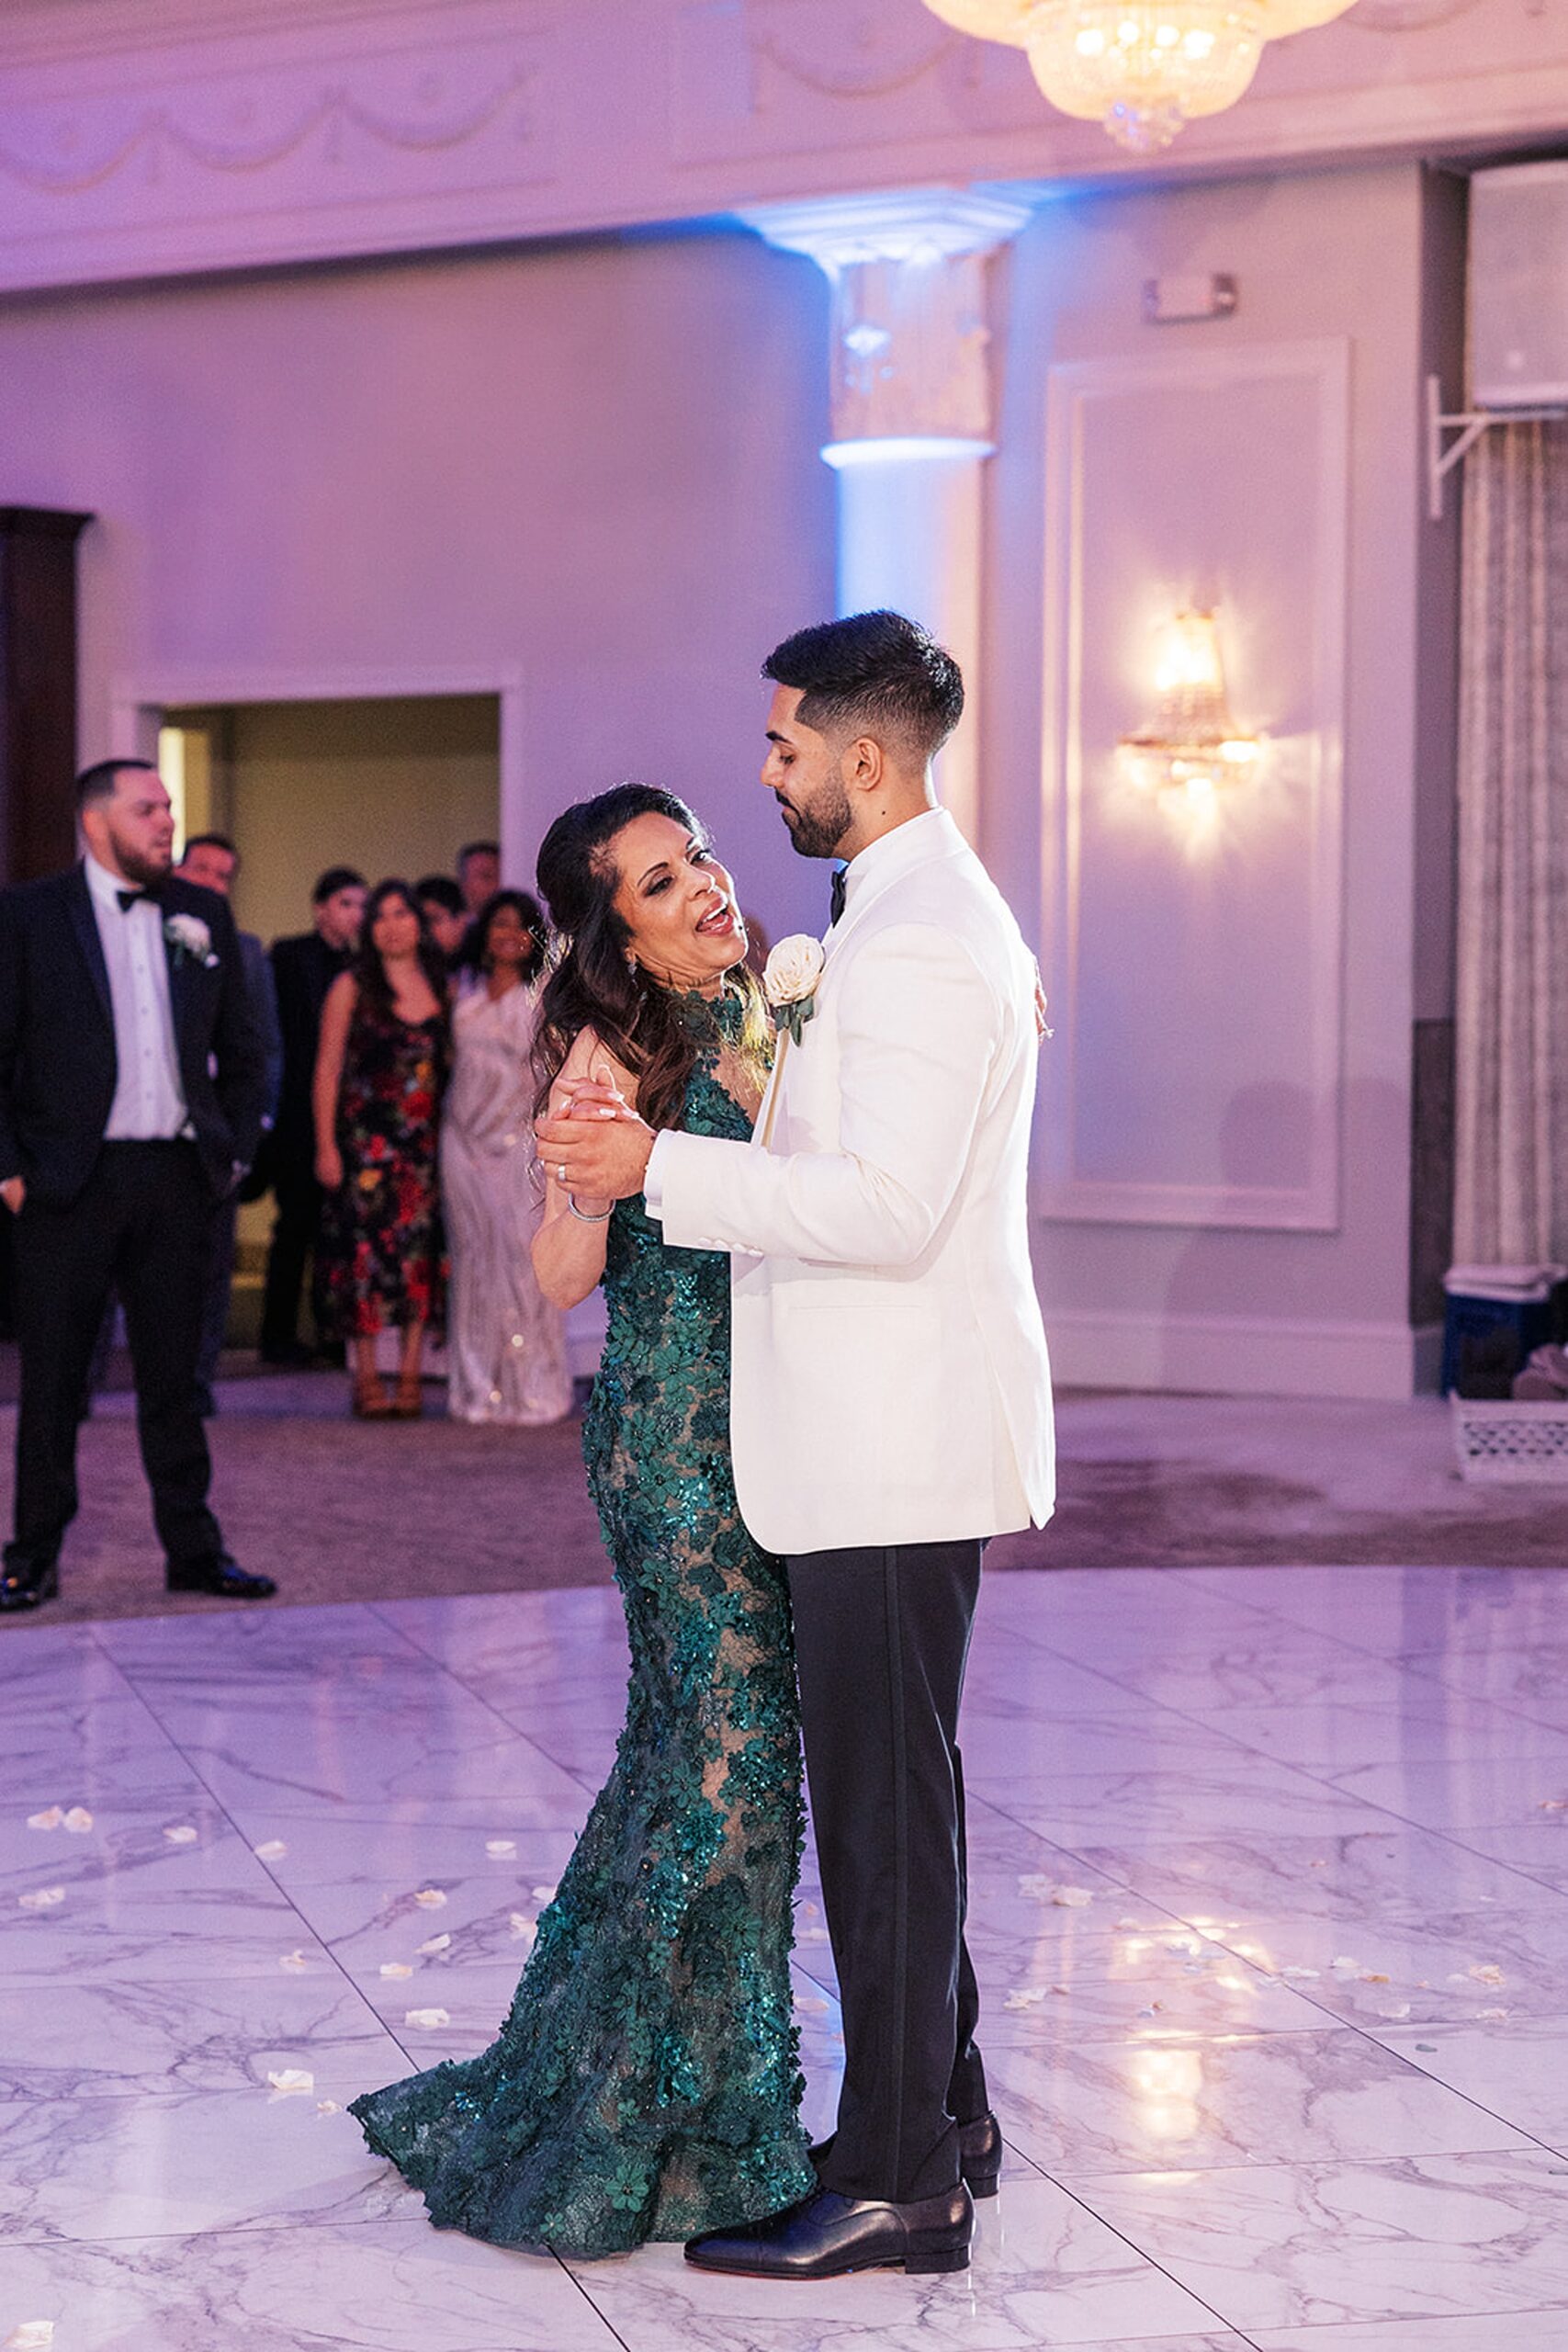 A groom in a white jacket dances with his mother in a green lace dress on a marble dance floor at a valley regency wedding